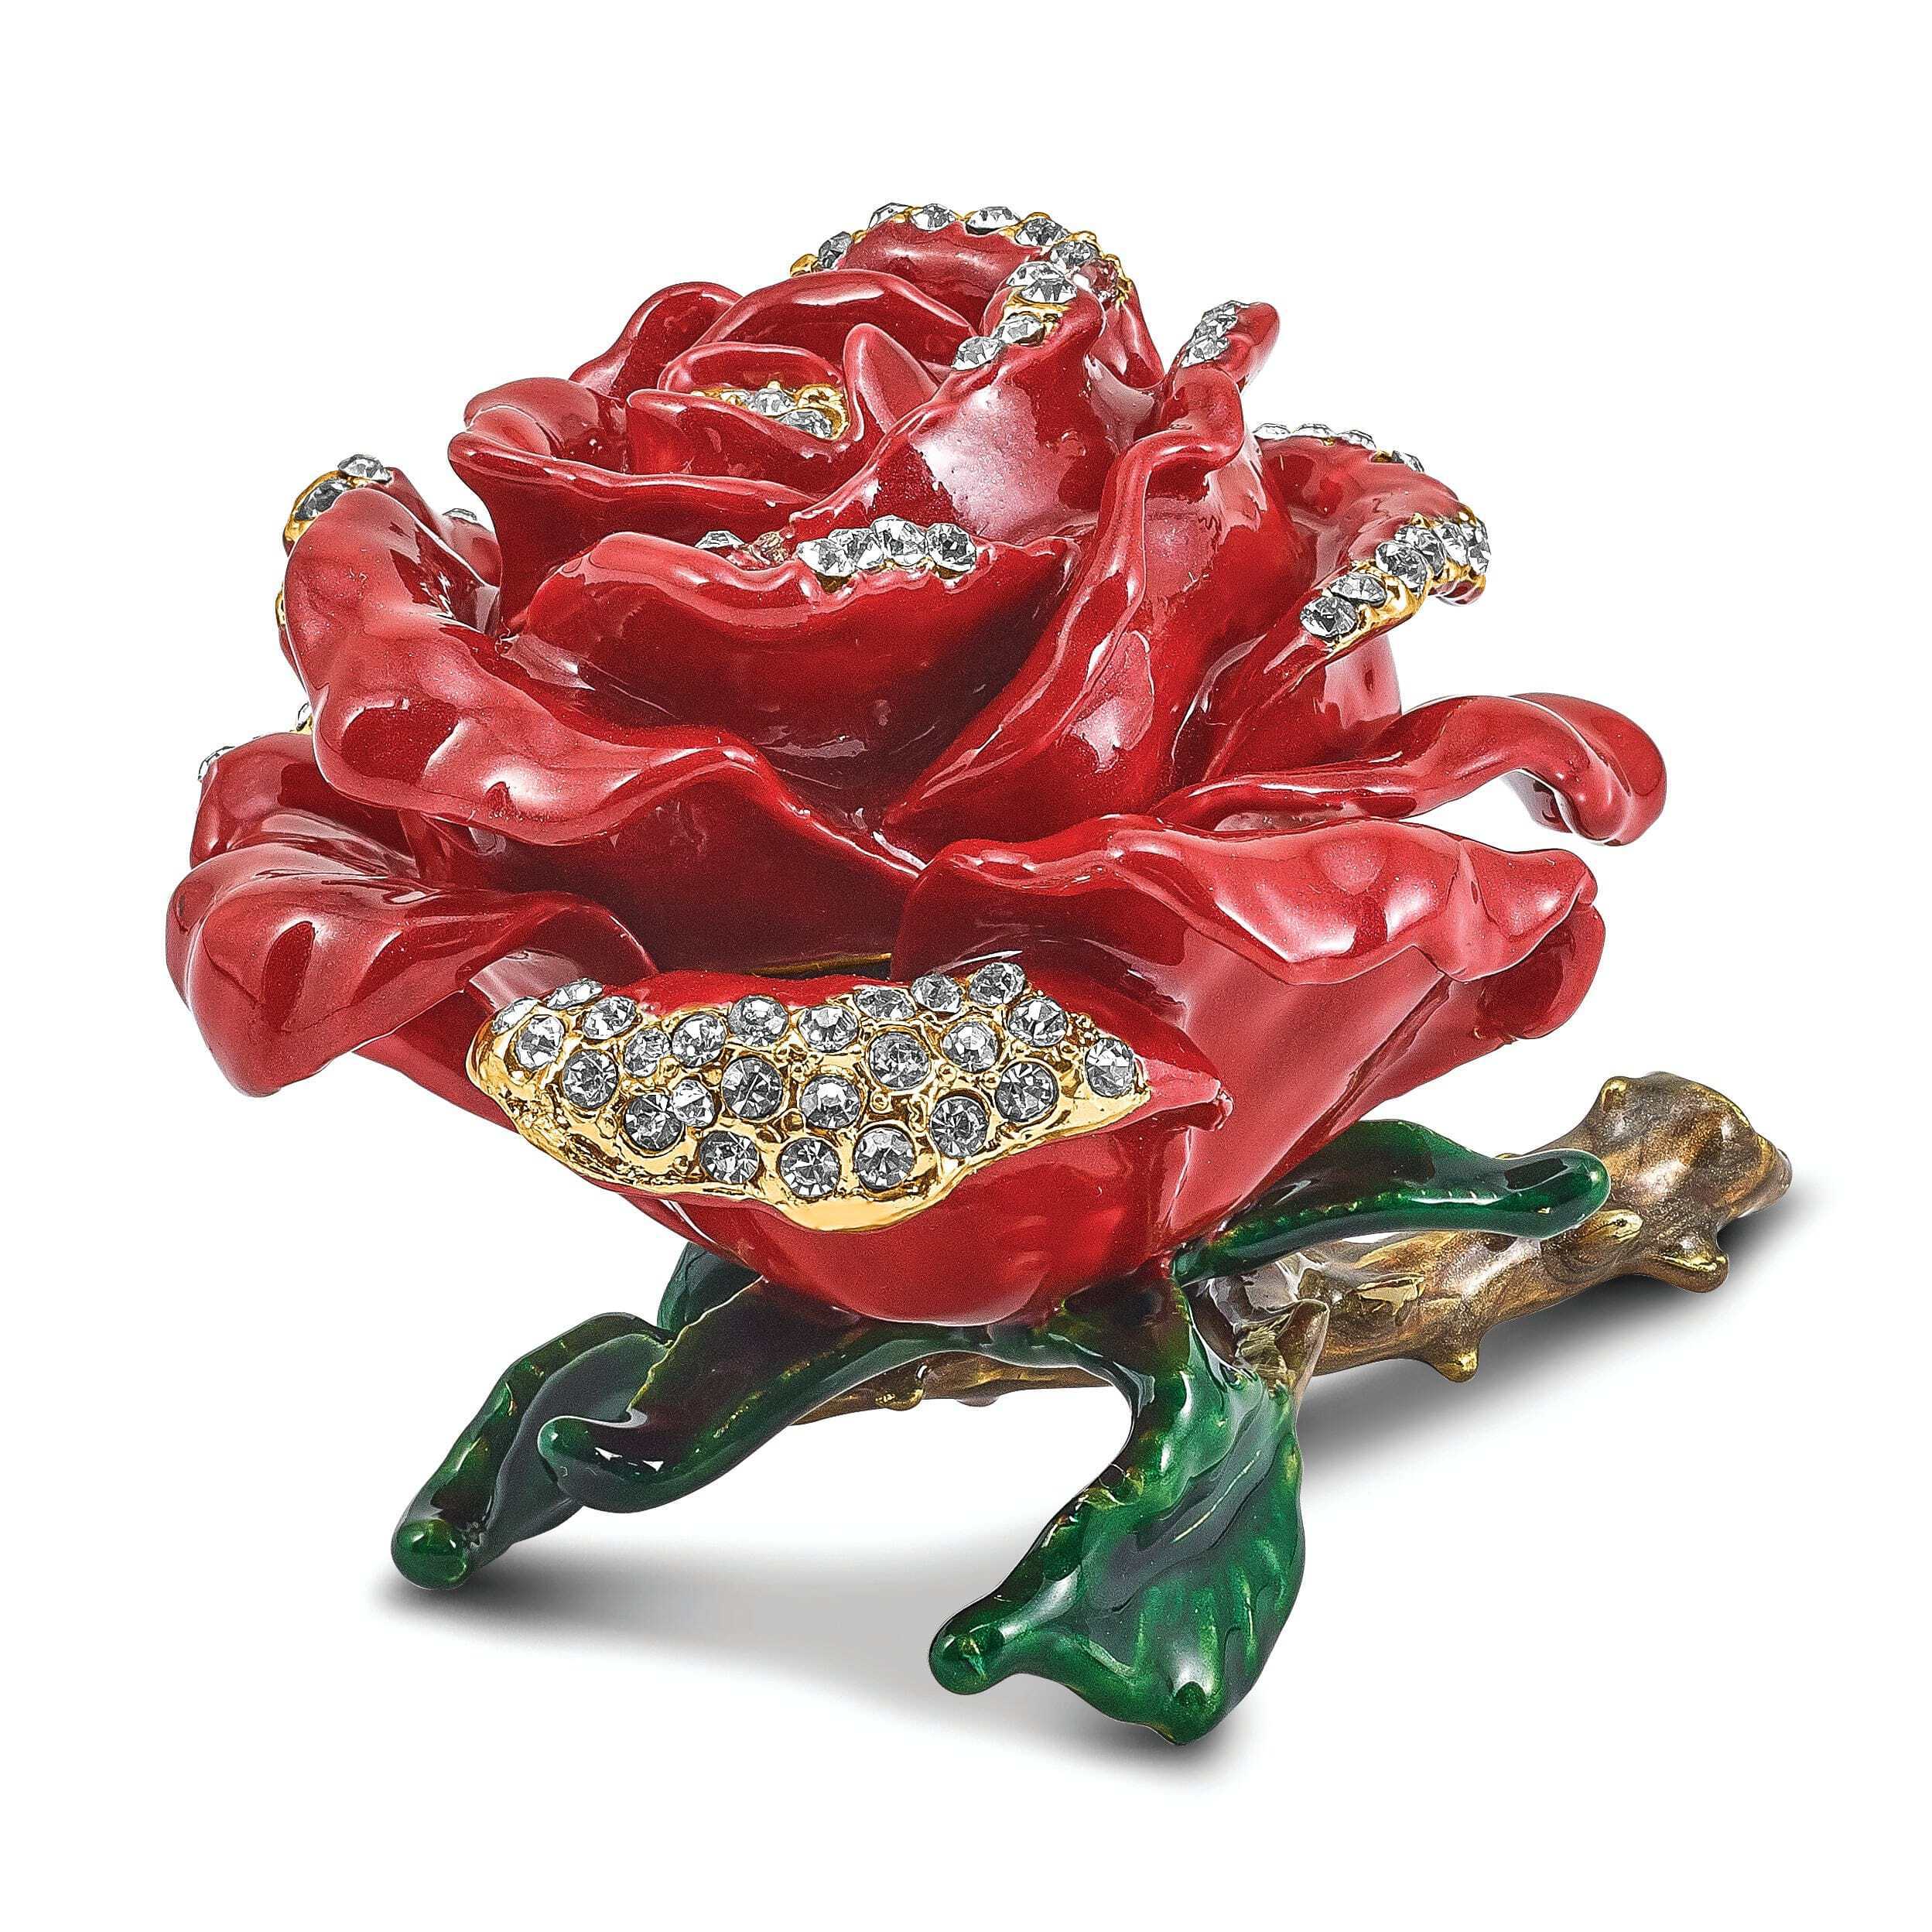 Bejeweled Pewter Multi Color Finish ROSA Red Rose Ring Pad Trinket Box - image 5 of 6